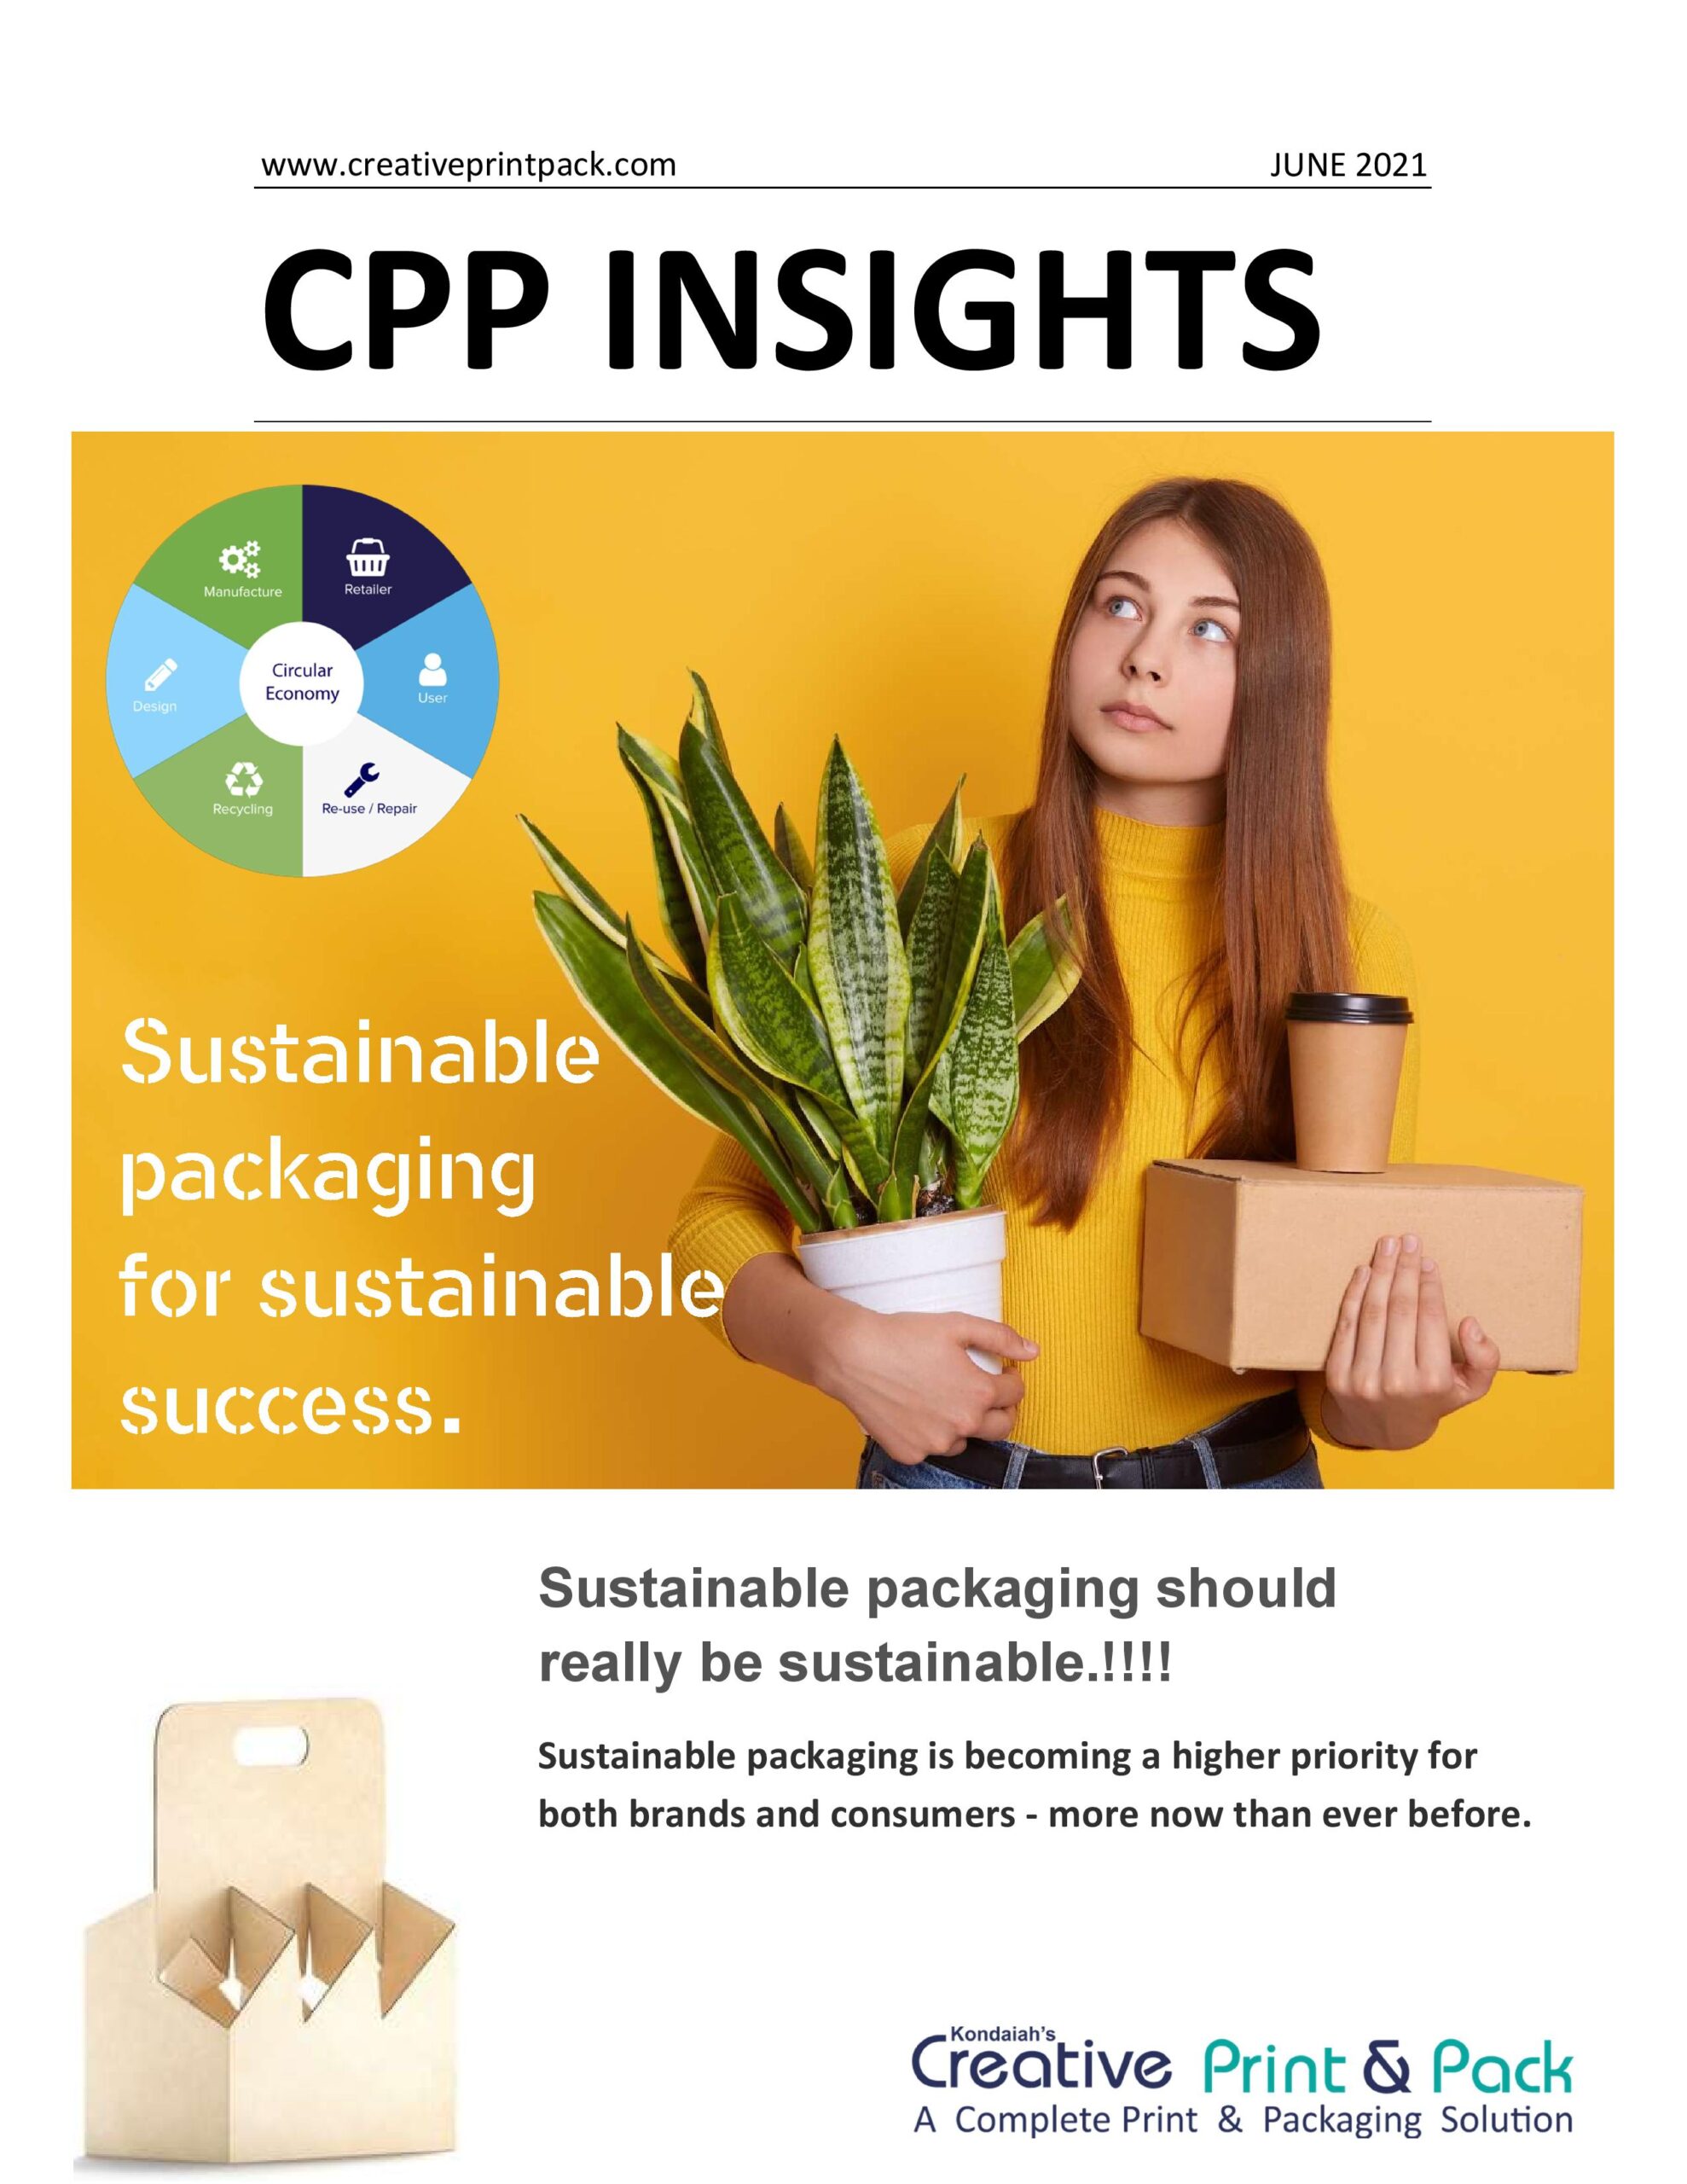 CPP INSIGHTS - SUSTAINABLE PACKAGING